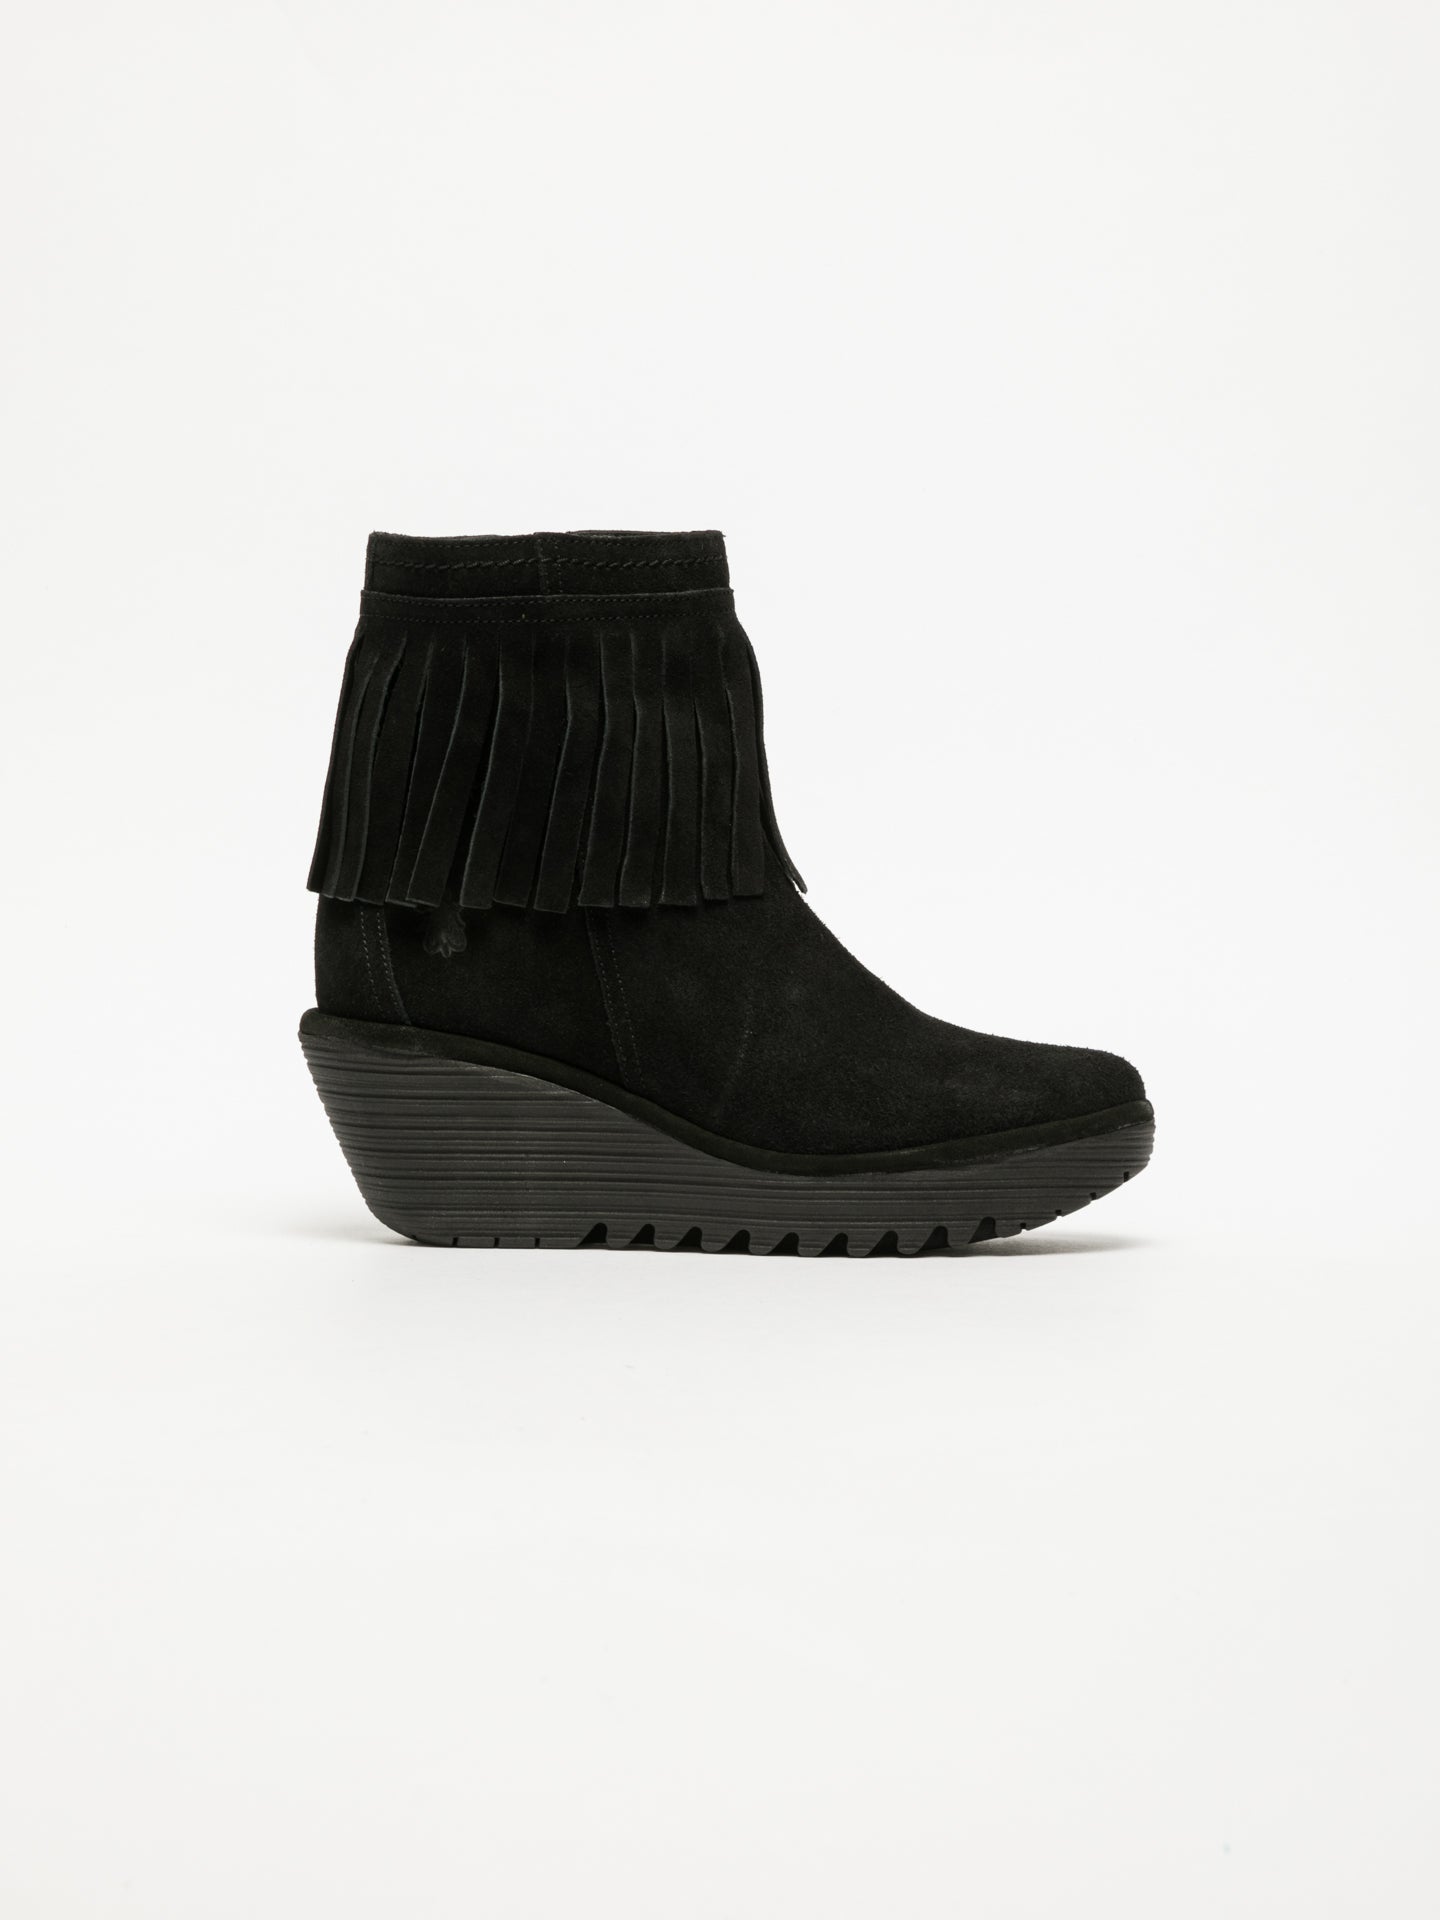 Fly London Black Fringed Ankle Boots